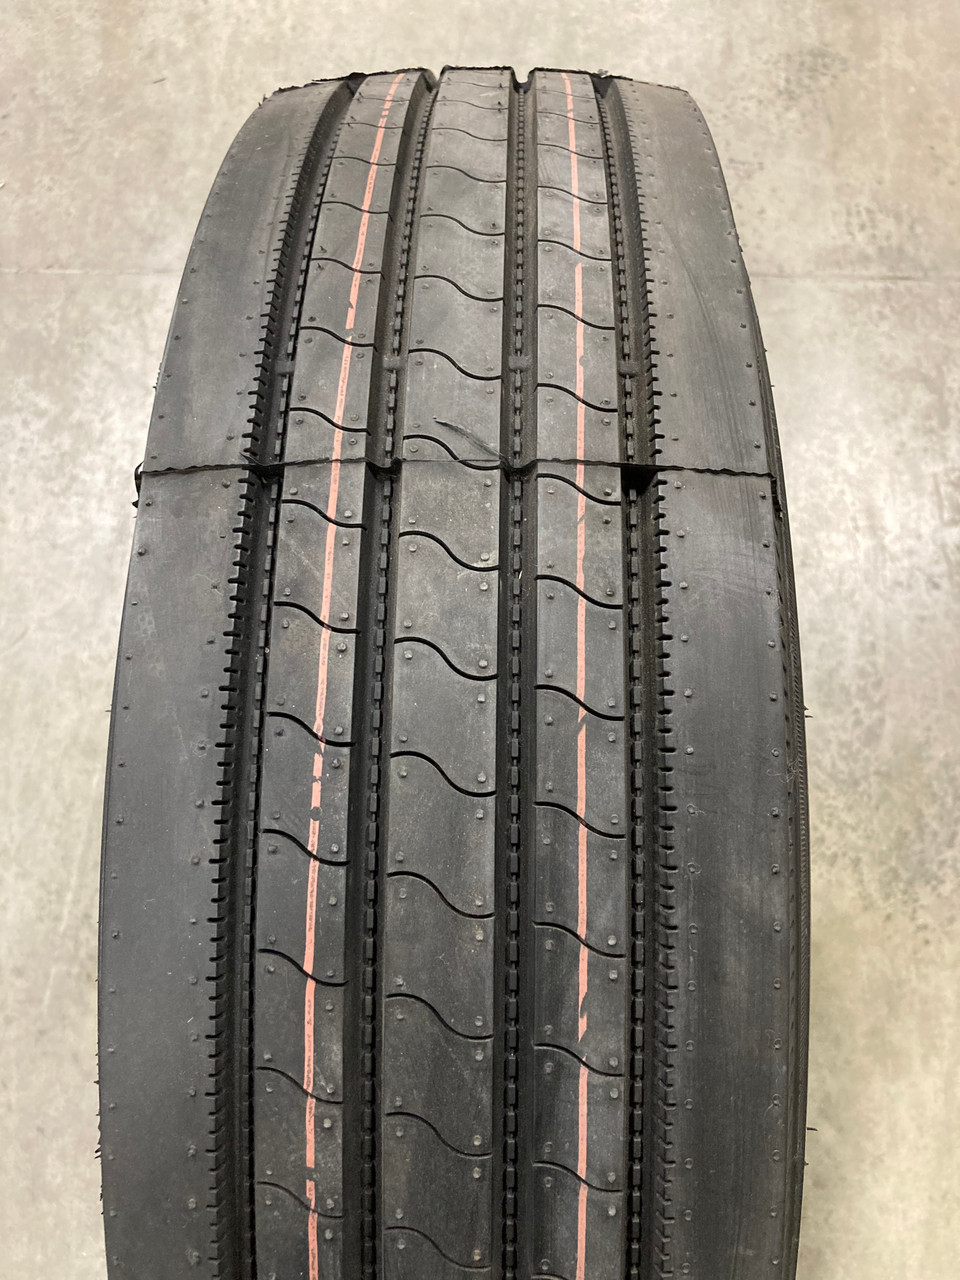 New Tire 235 80 16 K9 Trailer 14 Ply All Steel ST235/80R16 